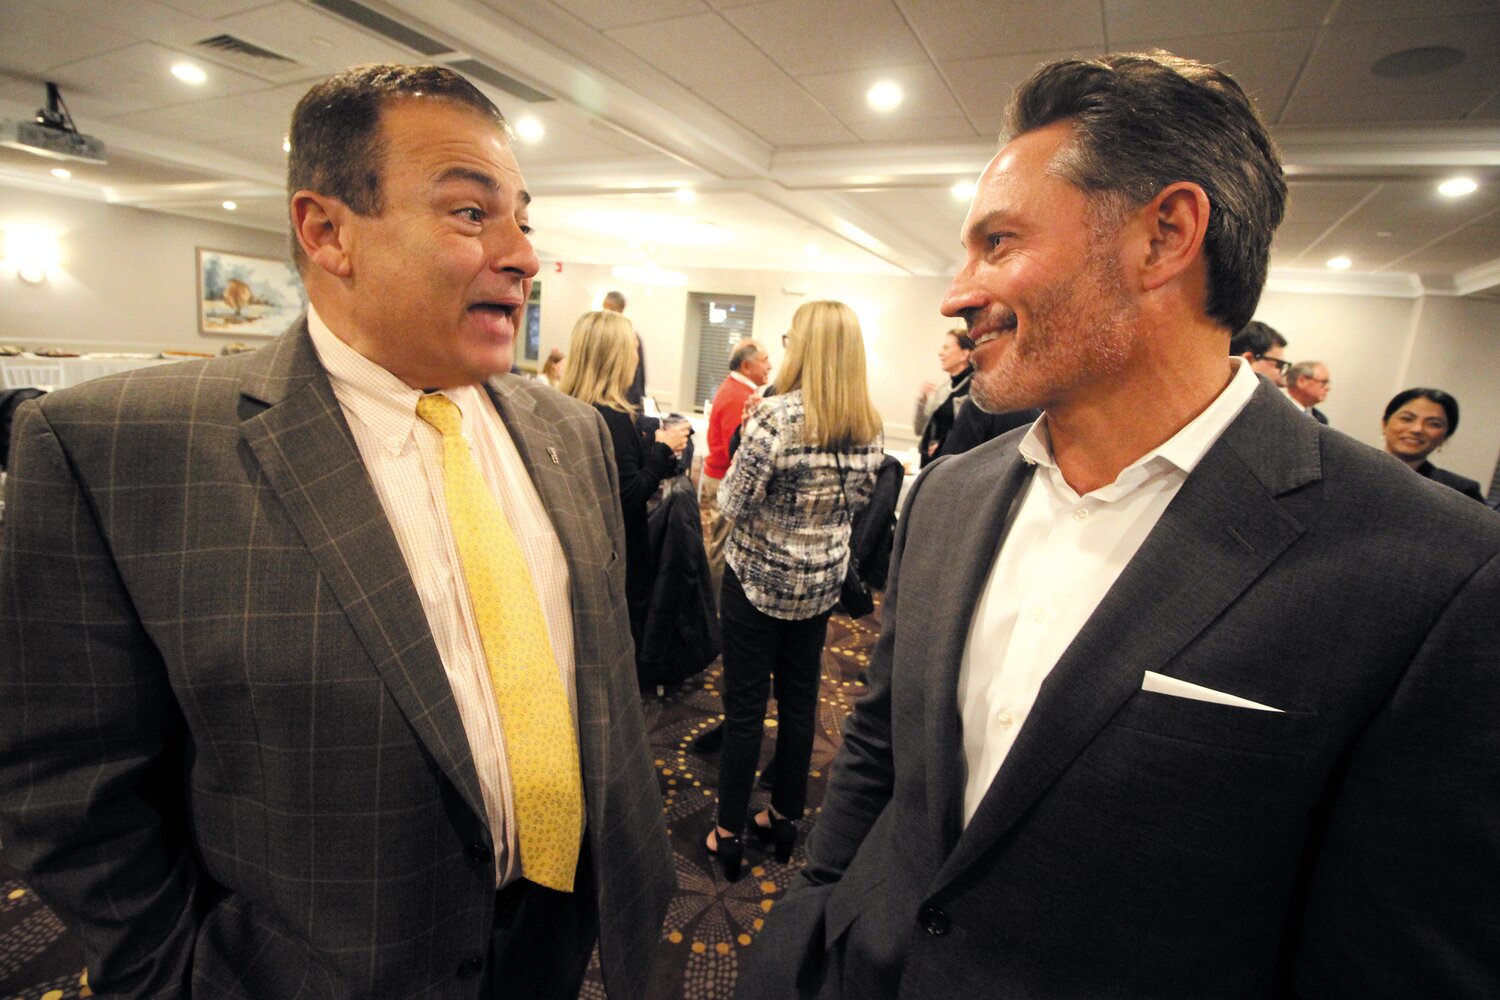 OPEN WIDE: More than 70 members of the Rhode Island dental community turned out Tuesday at a fundraiser for House Speaker K. Joseph Shekarchi at Chelo’s in Warwick. Here, Shekarchi, left, talks with association president Dr. Frederick Hartman. The event raised more than $20,000. (Warwick Beacon photo)